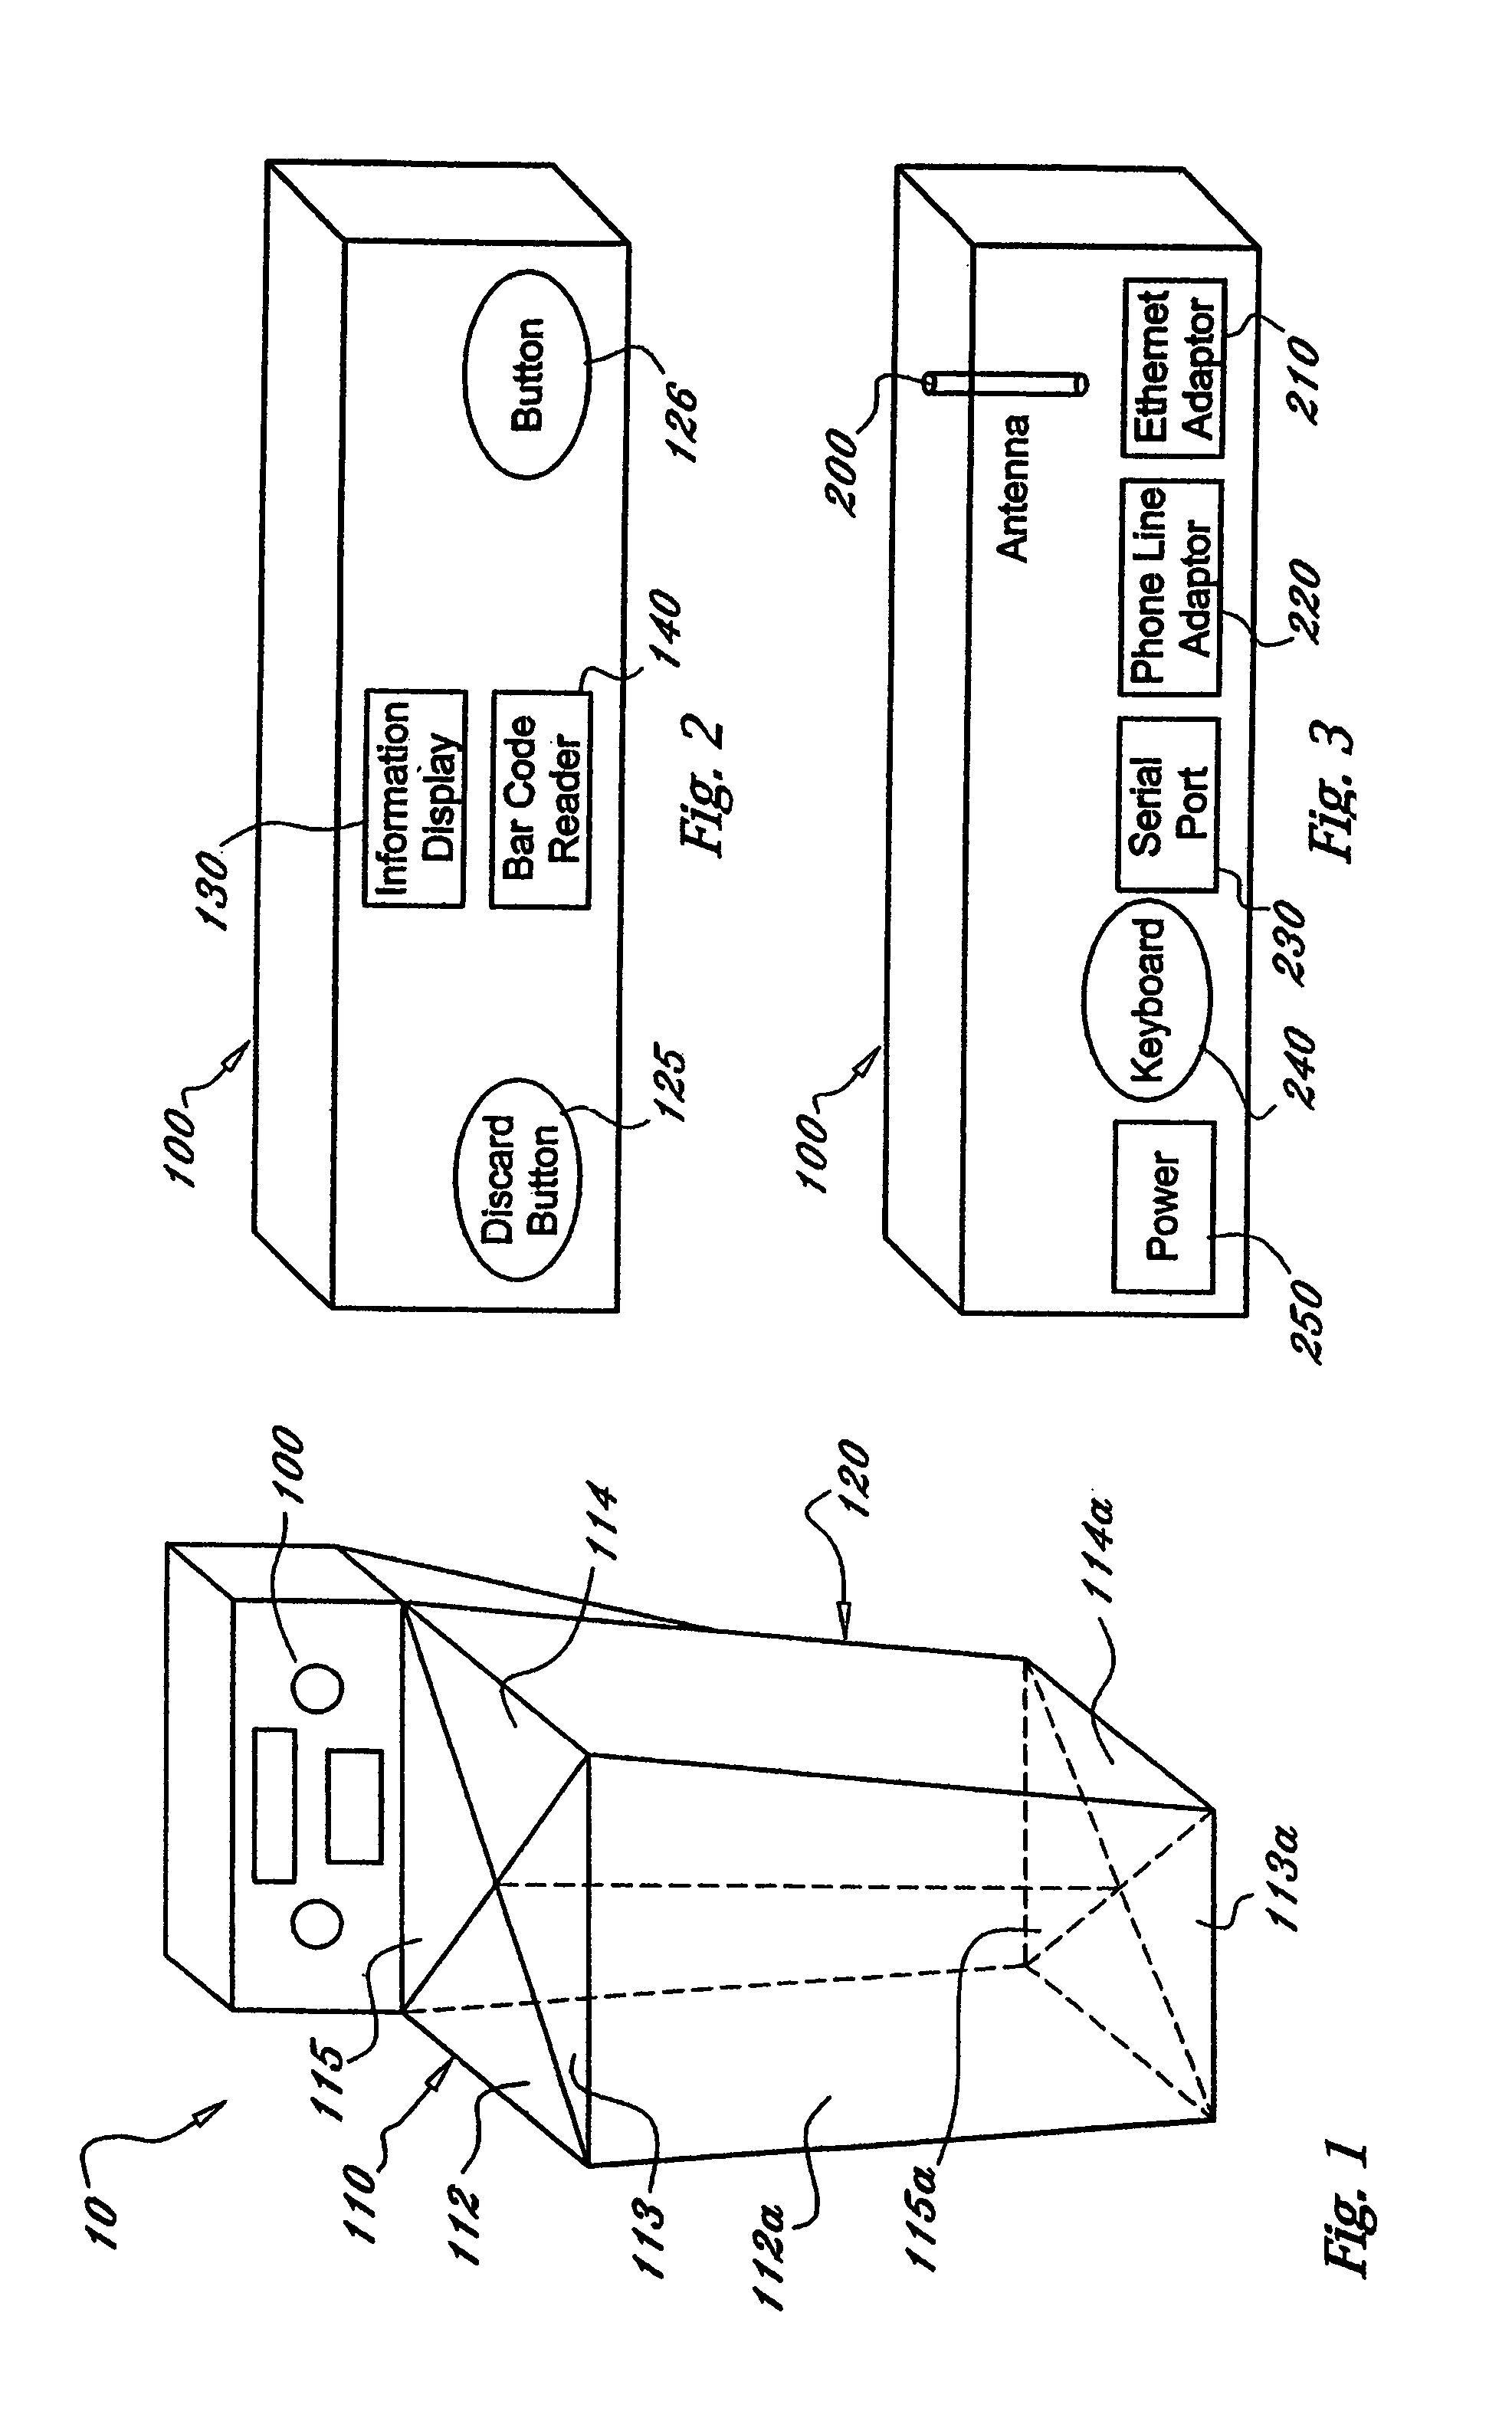 Method and system for disposing of discarded items